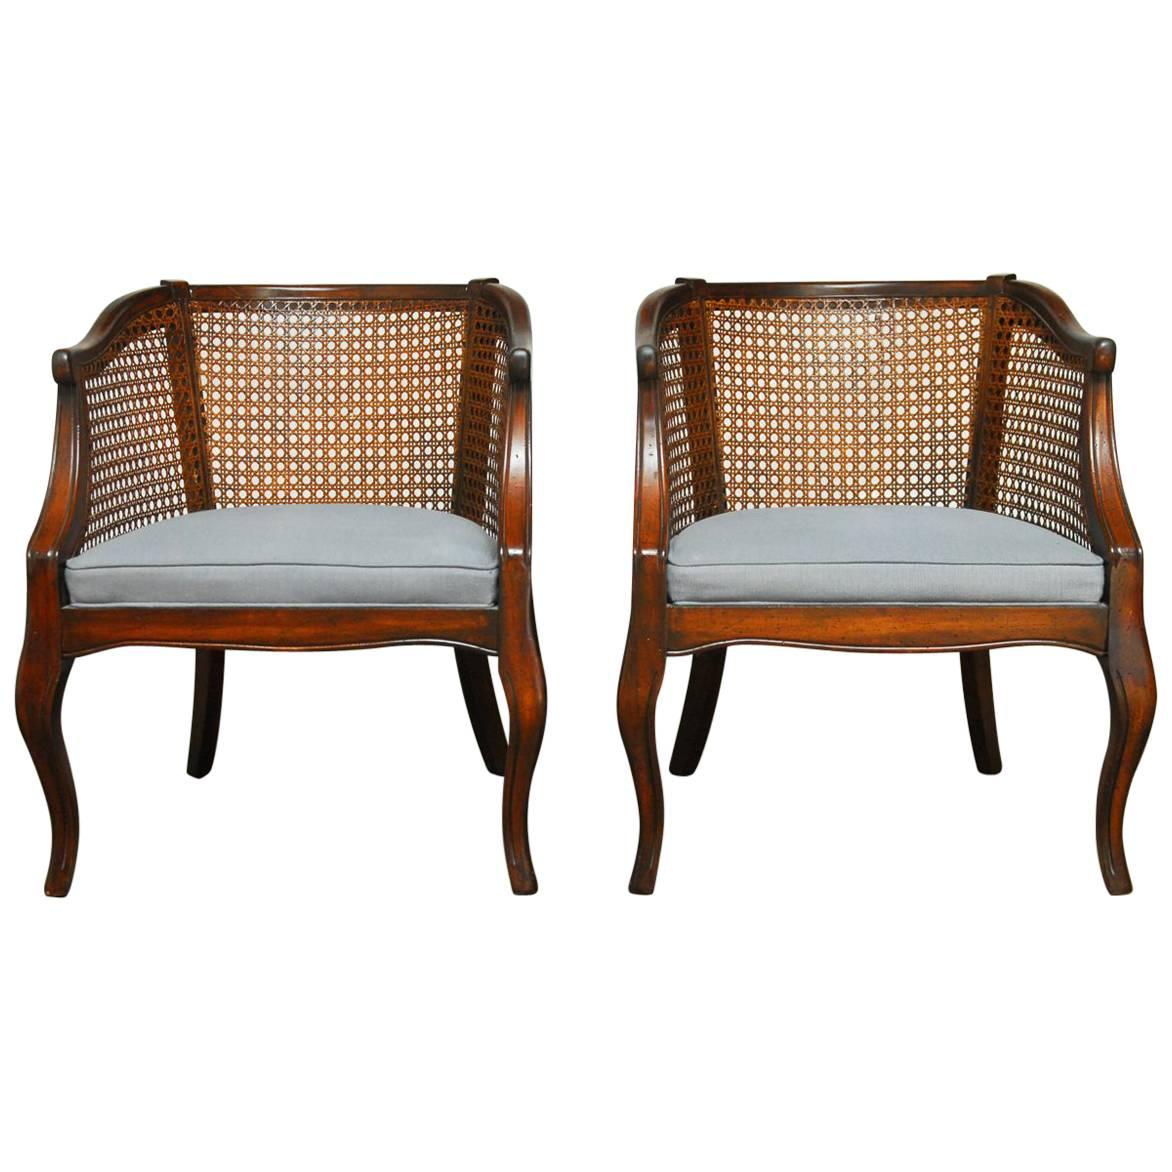 Pair of Mid-Century Barrel Back Cane Chairs